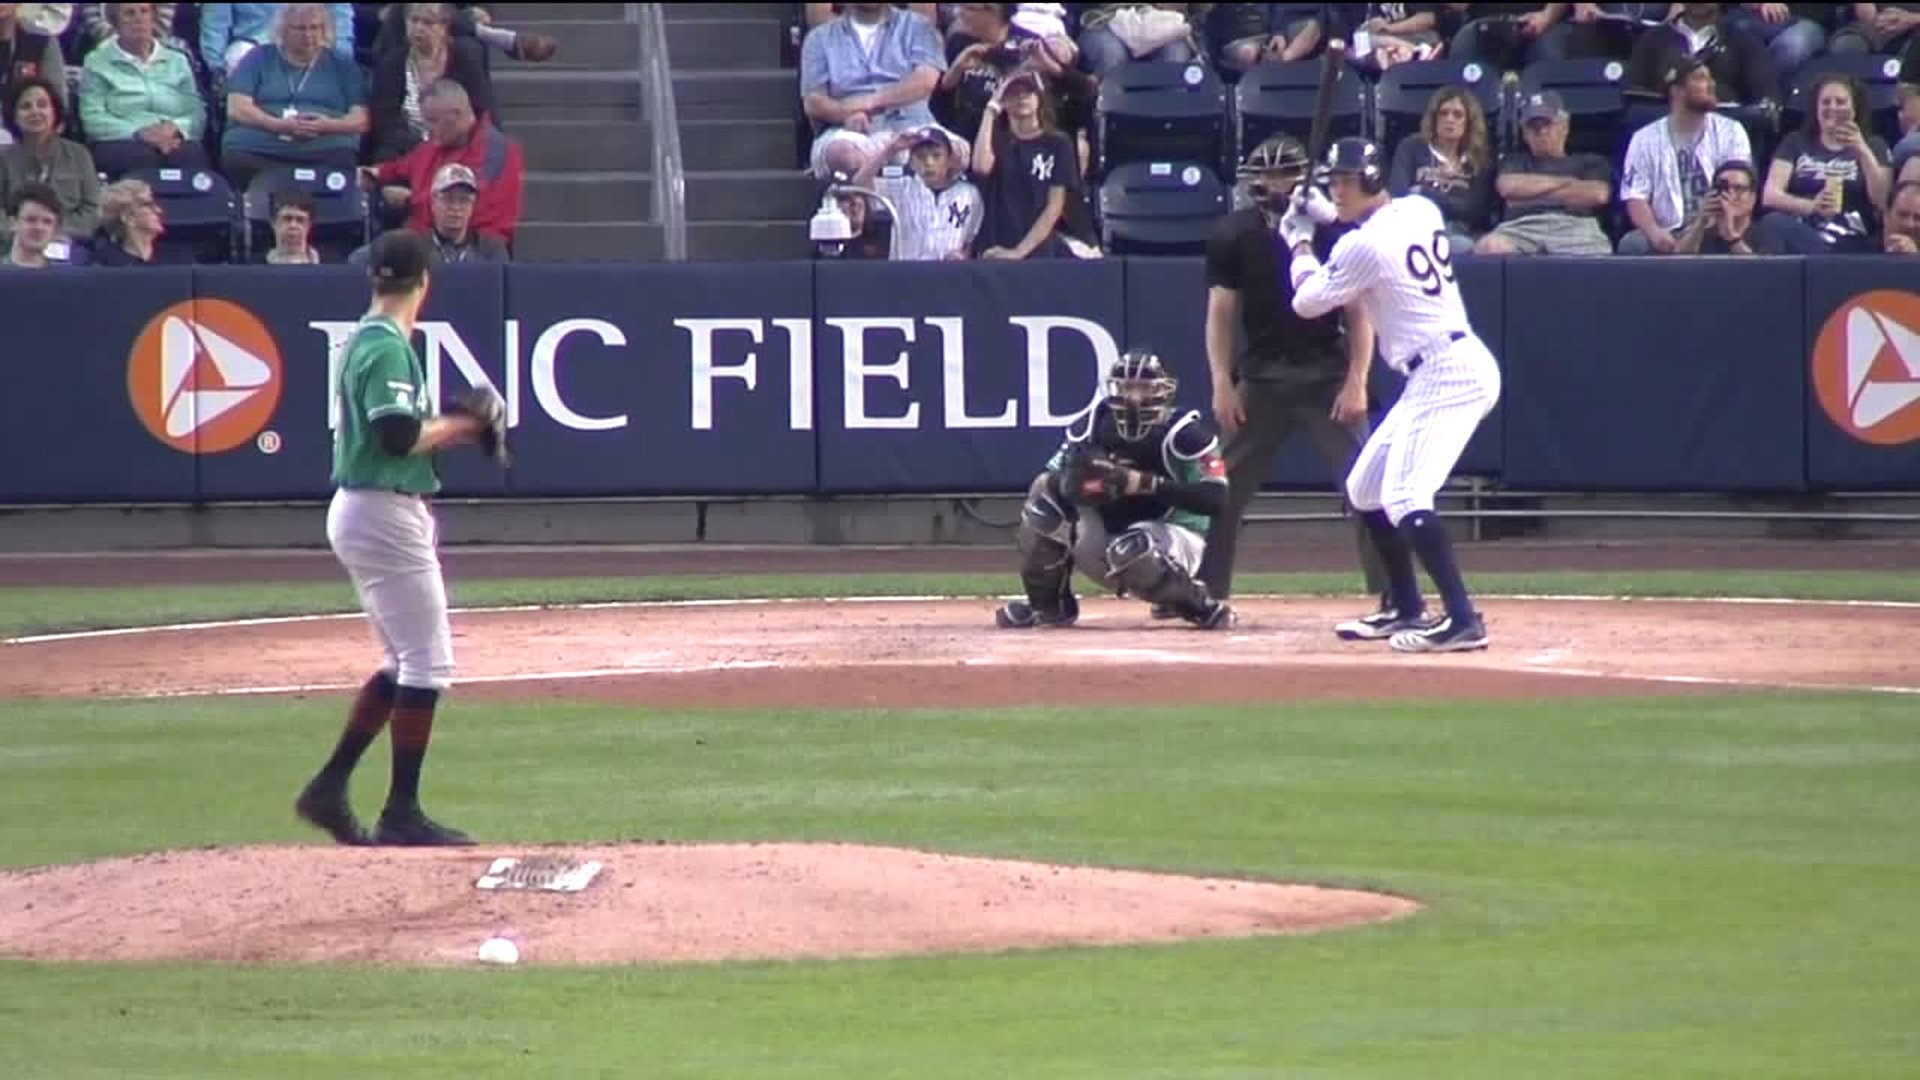 Fans Pack PNC Field to Watch Yankees Slugger Aaron Judge